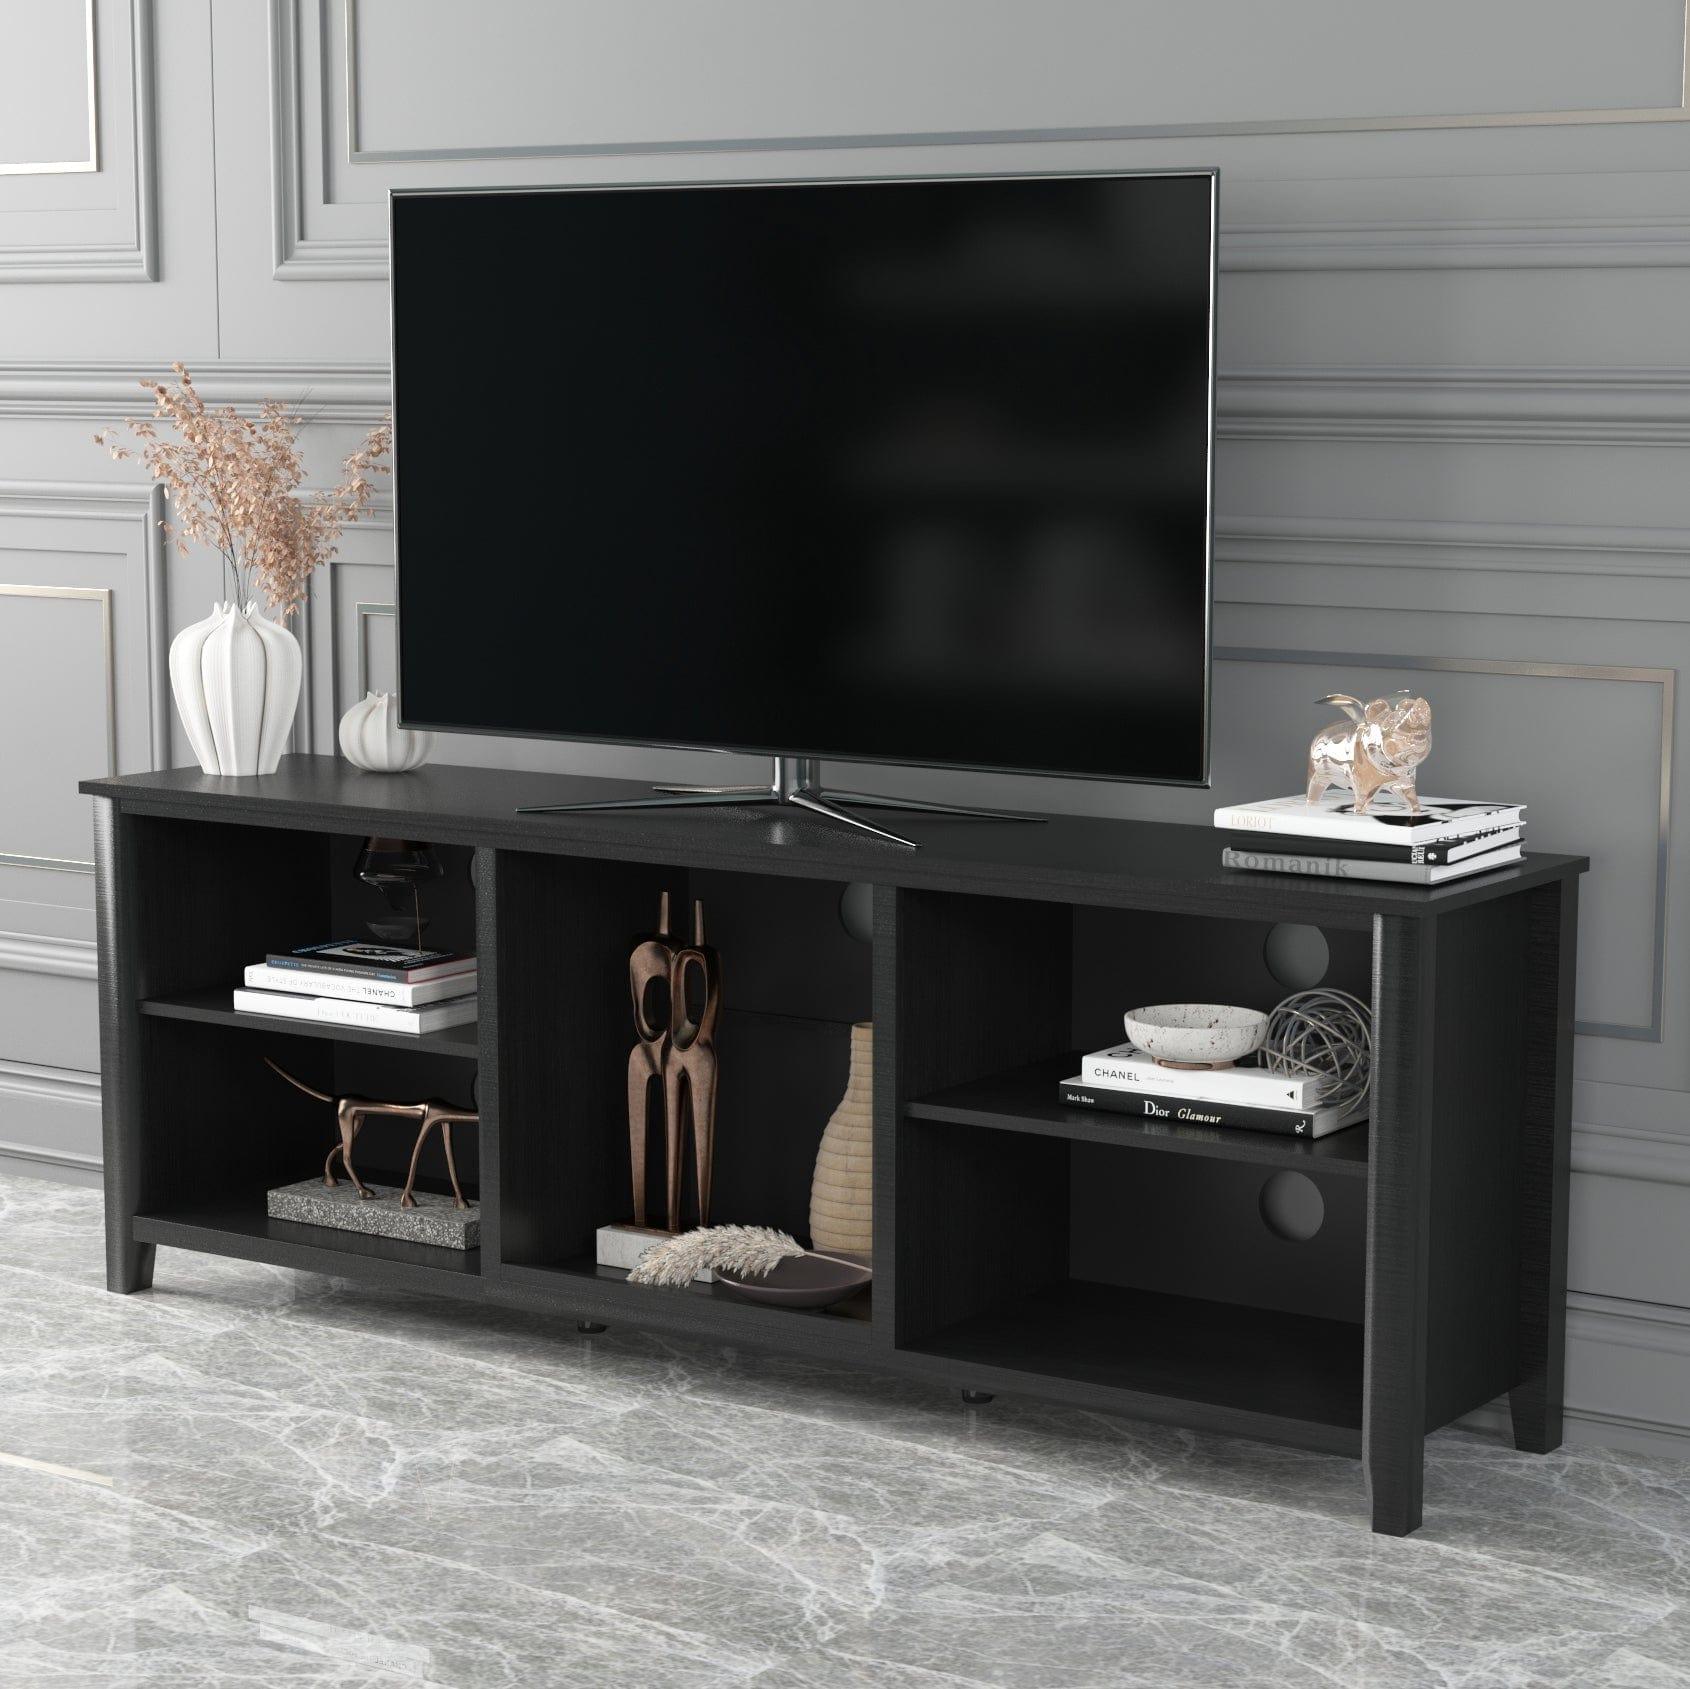 Shop TV Stand Storage Media Console Entertainment Center,Tradition Black,wihout drawer Mademoiselle Home Decor